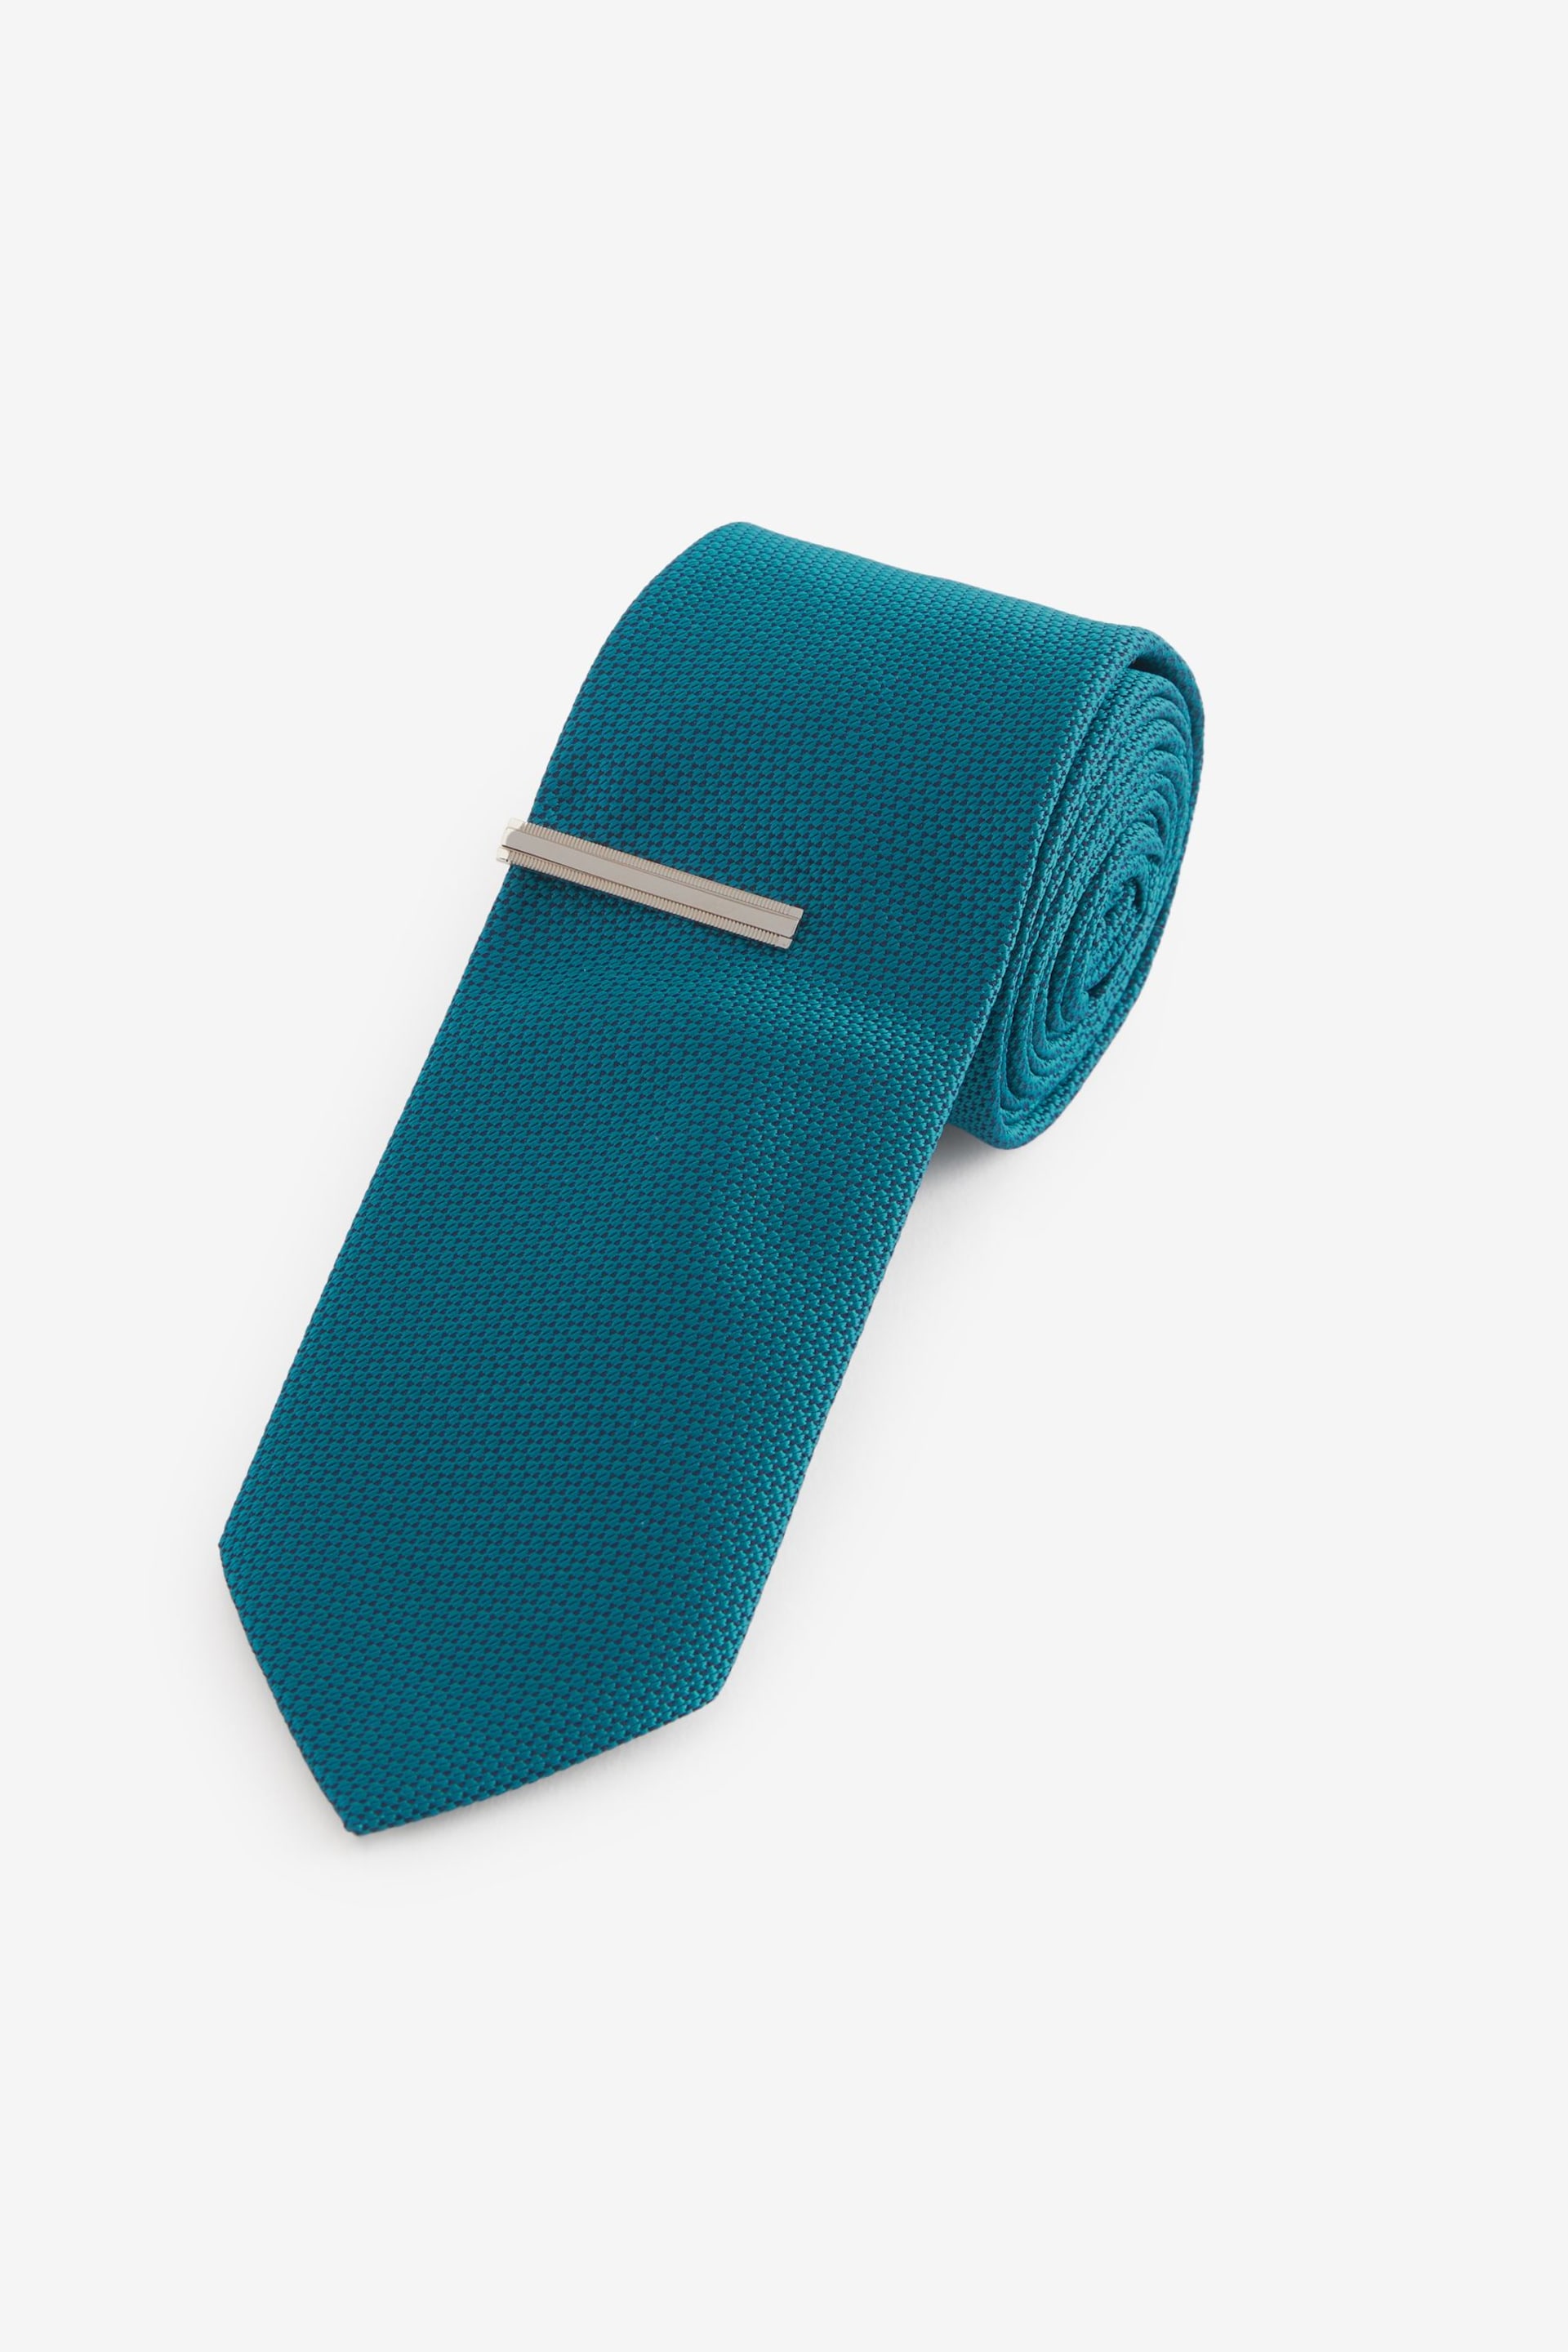 Teal Blue Slim Textured Tie And Clip Set - Image 1 of 3